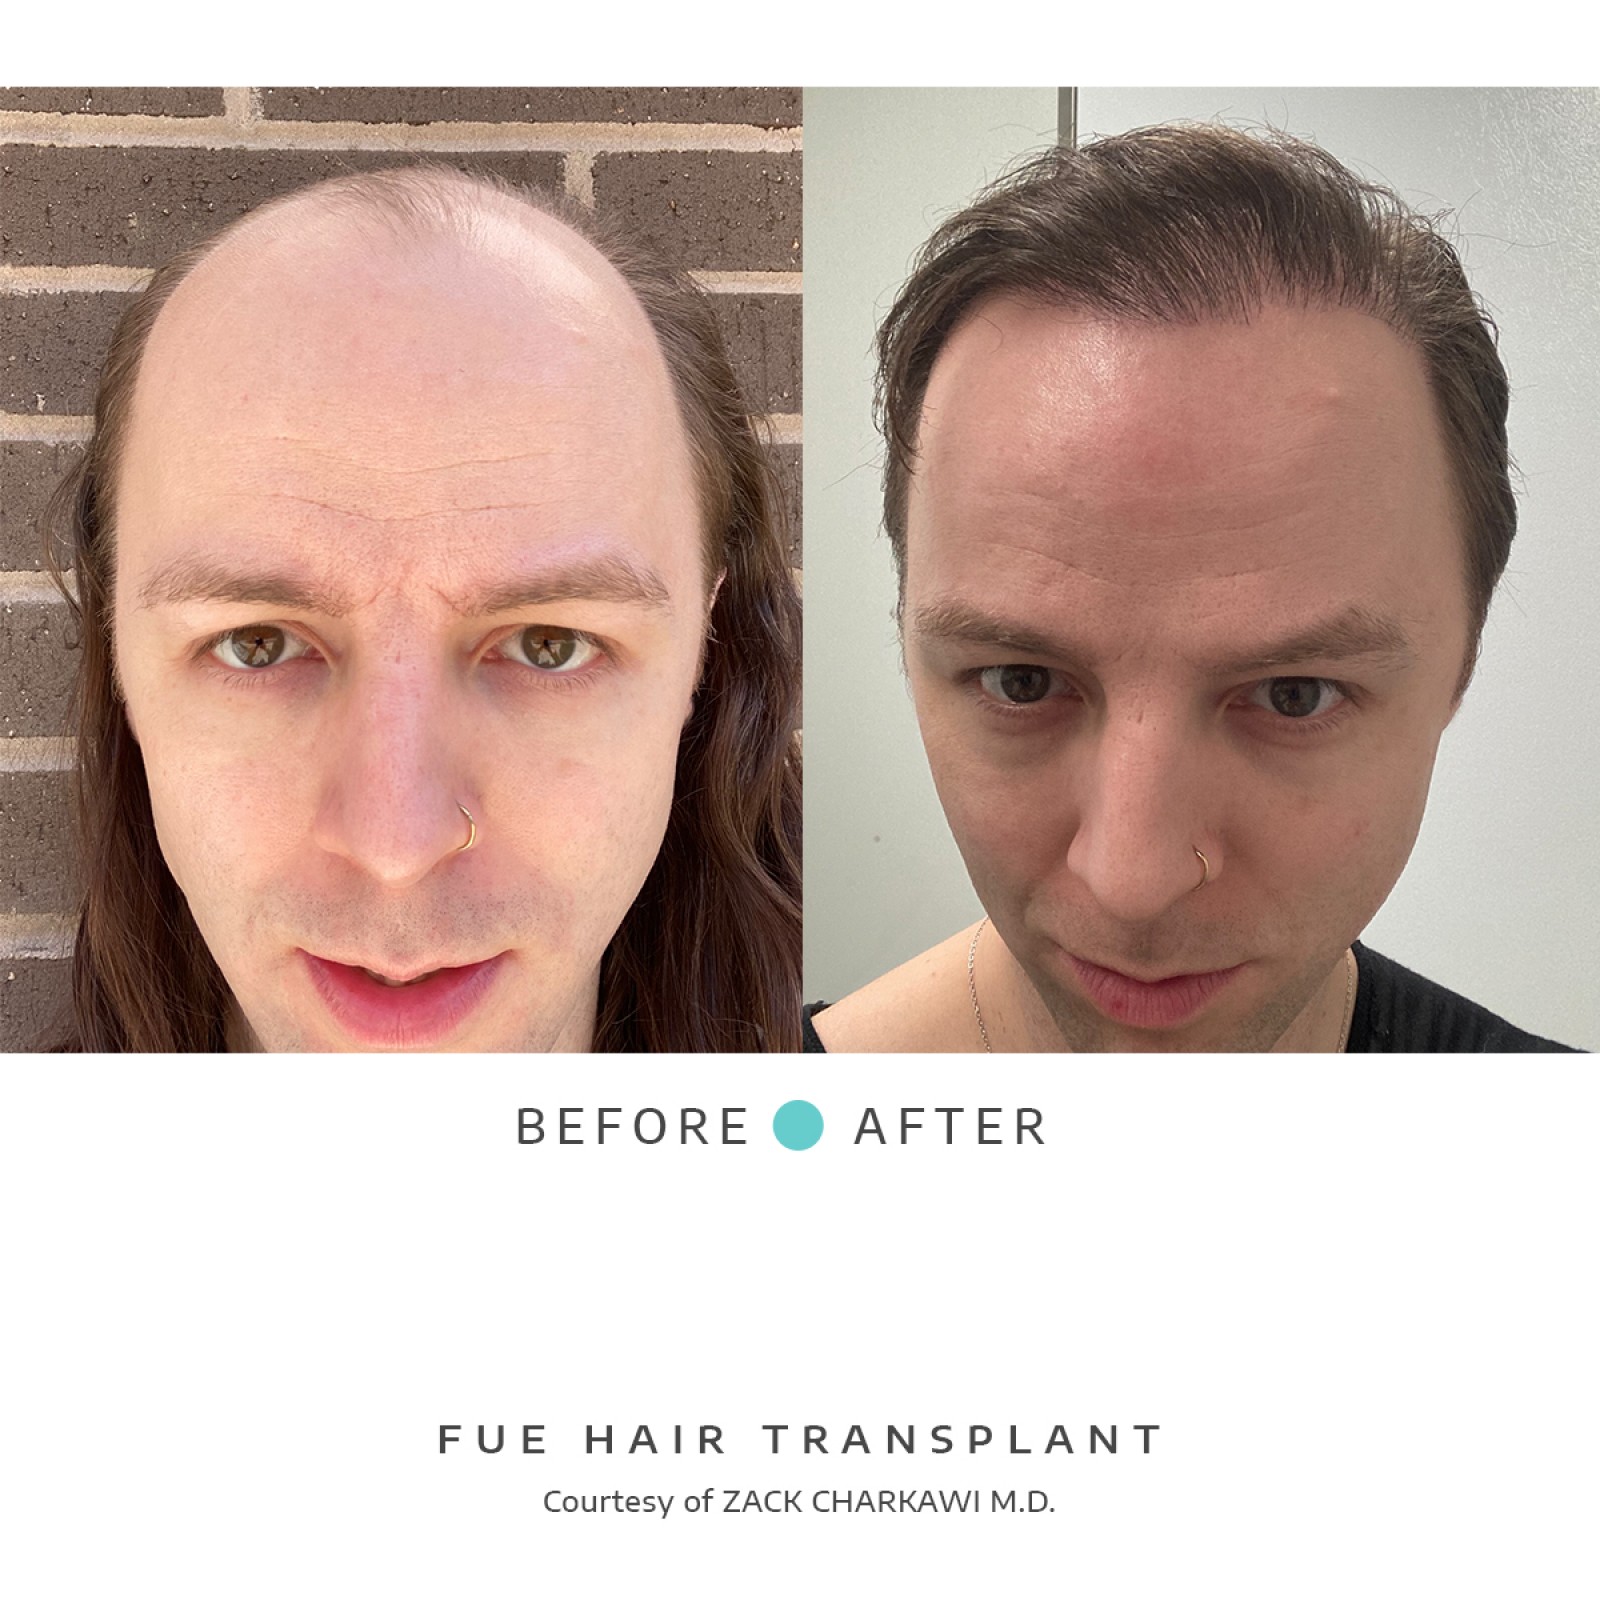 A before image shows balding and thinning hair with visible scalp patches. The after shows a successful hair transplant, the scalp is now covered with dense, natural-looking hair.